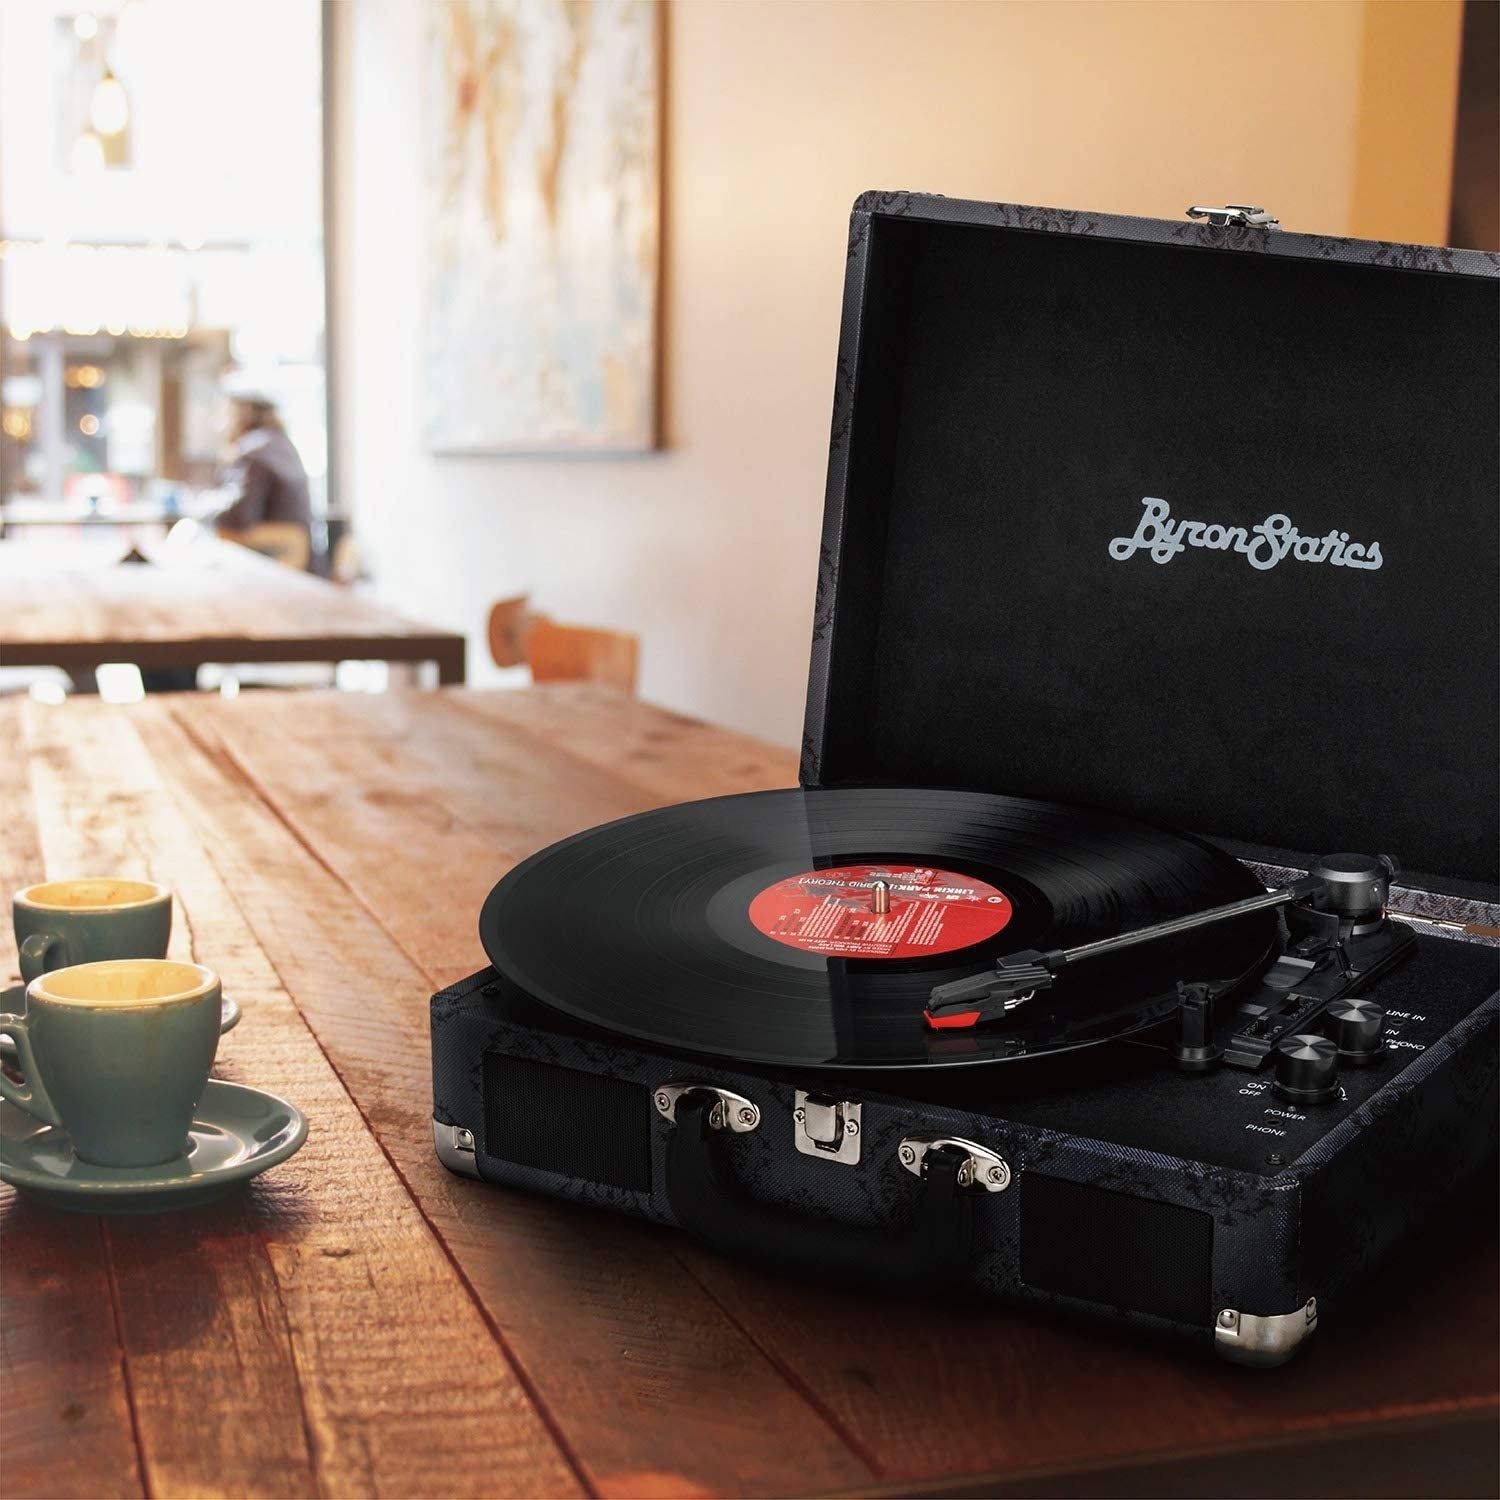 A record player with a vinyl record ready to be played